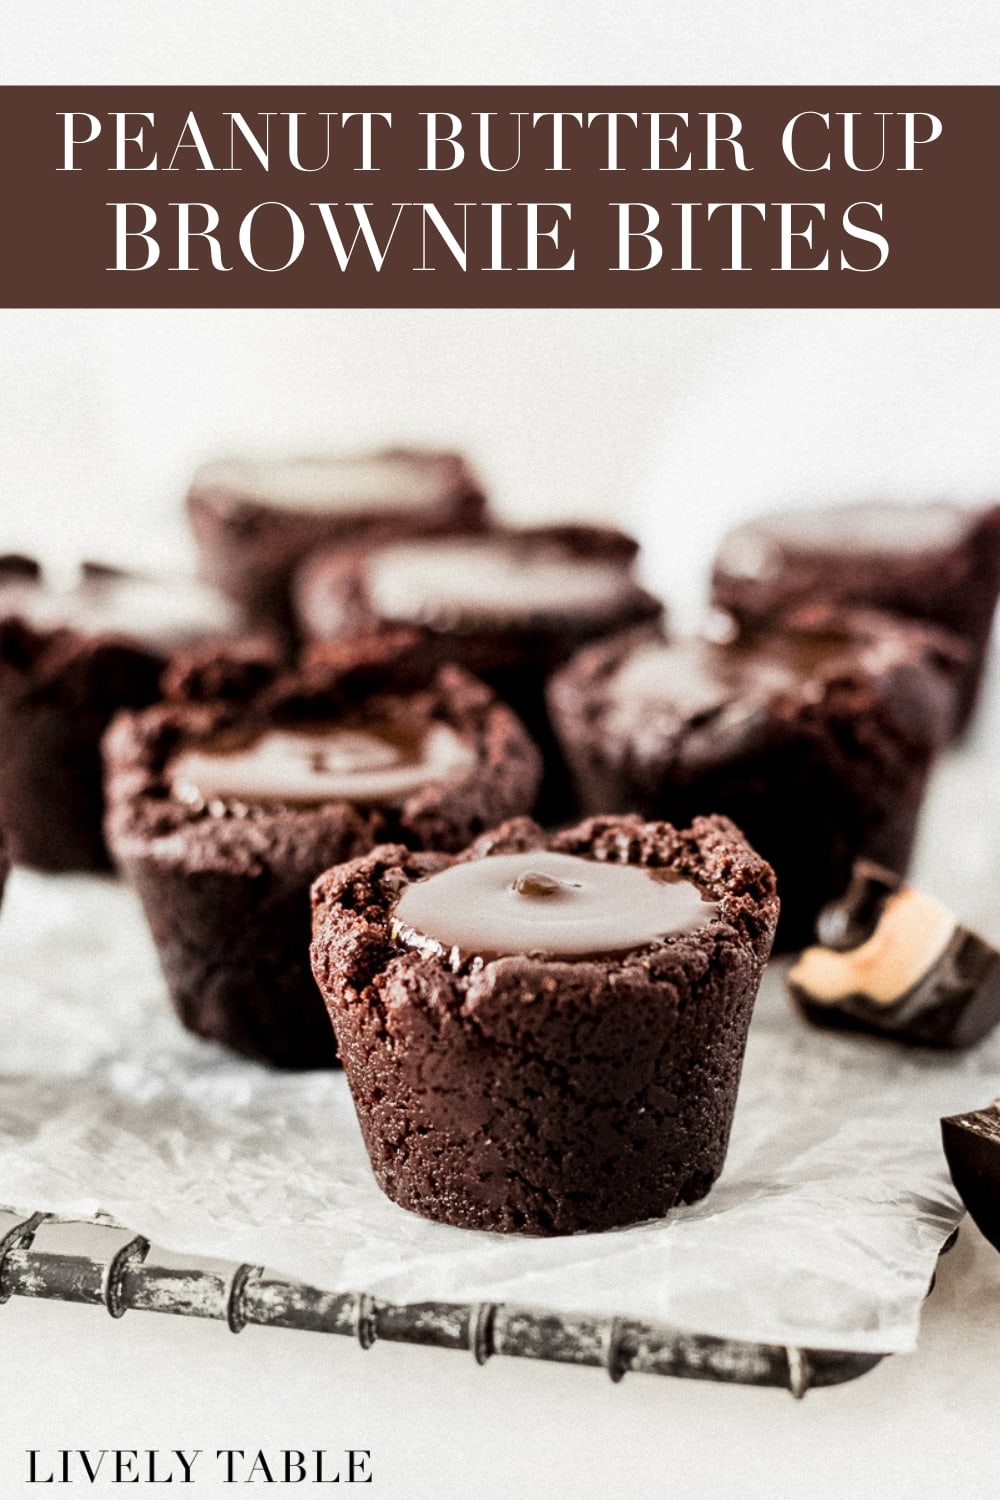 Peanut Butter Cup Brownie Bites - Lively Table